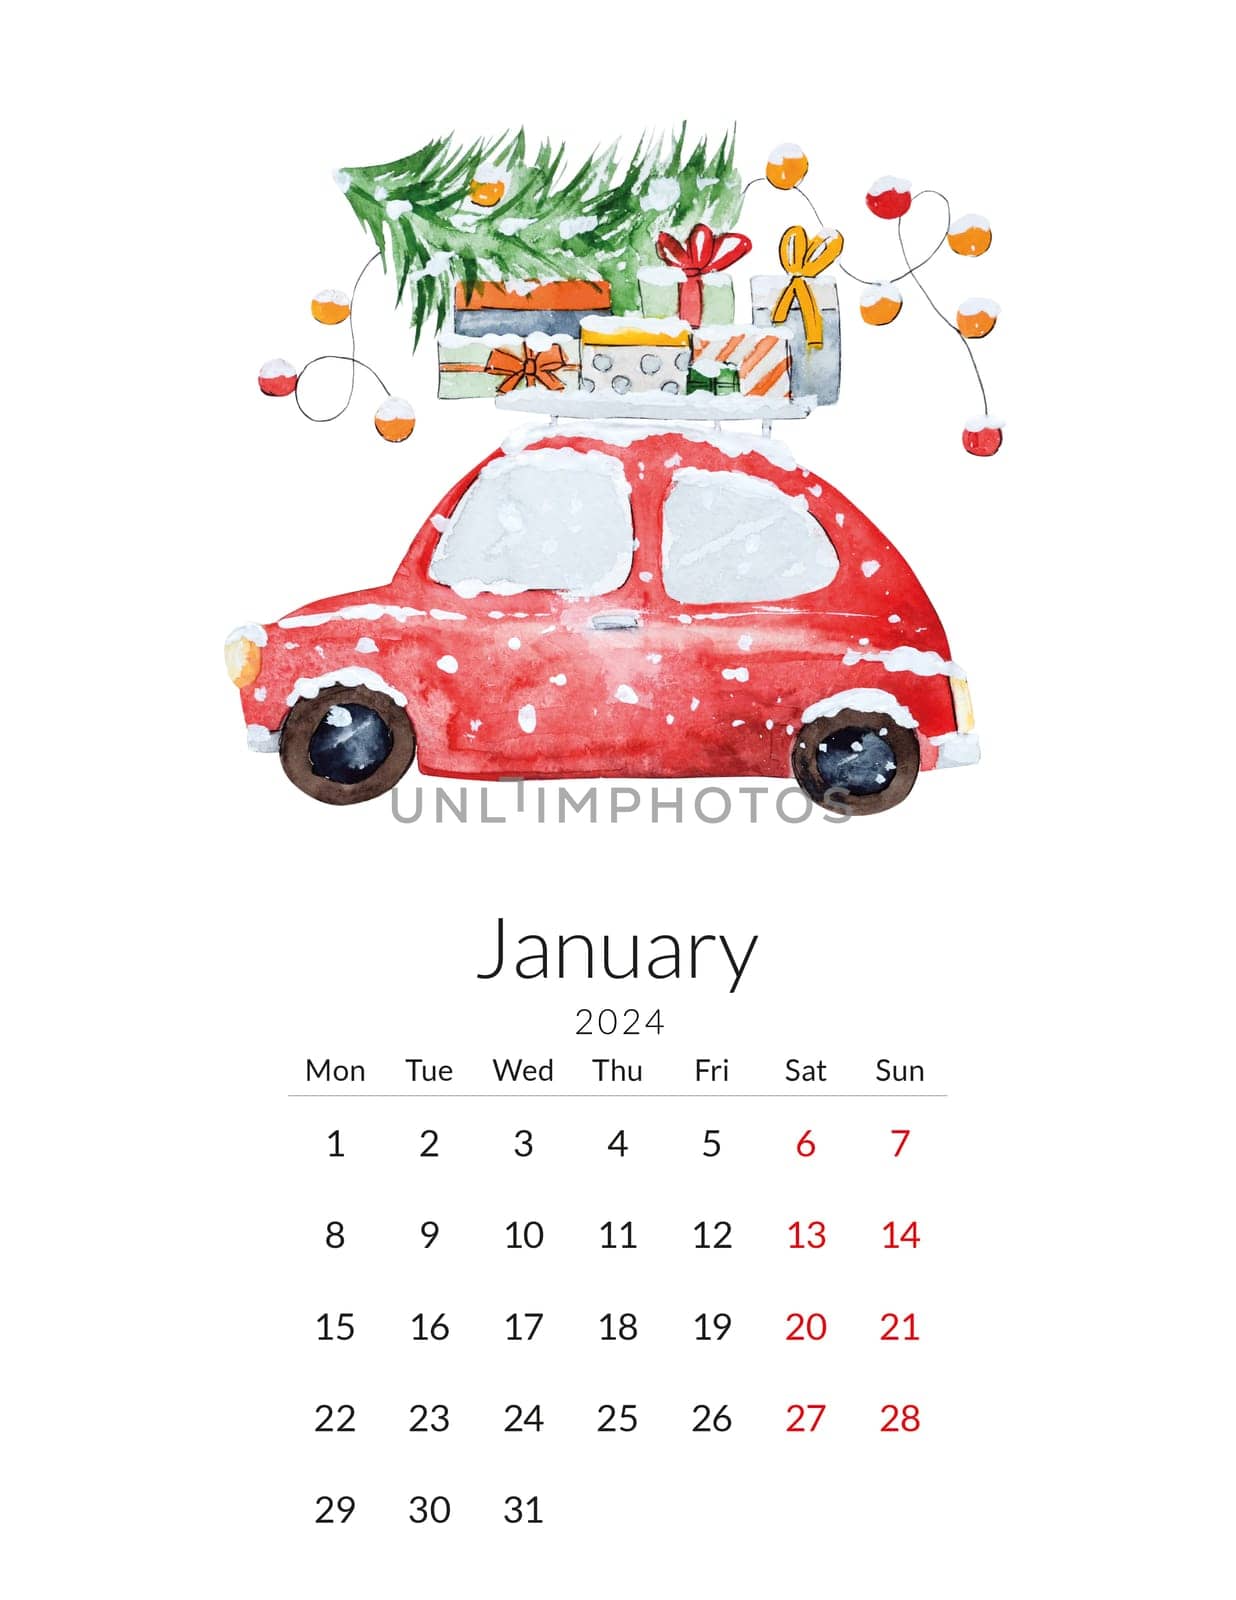 January 2024 calendar template. Handmade watercolor - Red Christmas car with a Christmas tree on the roof.